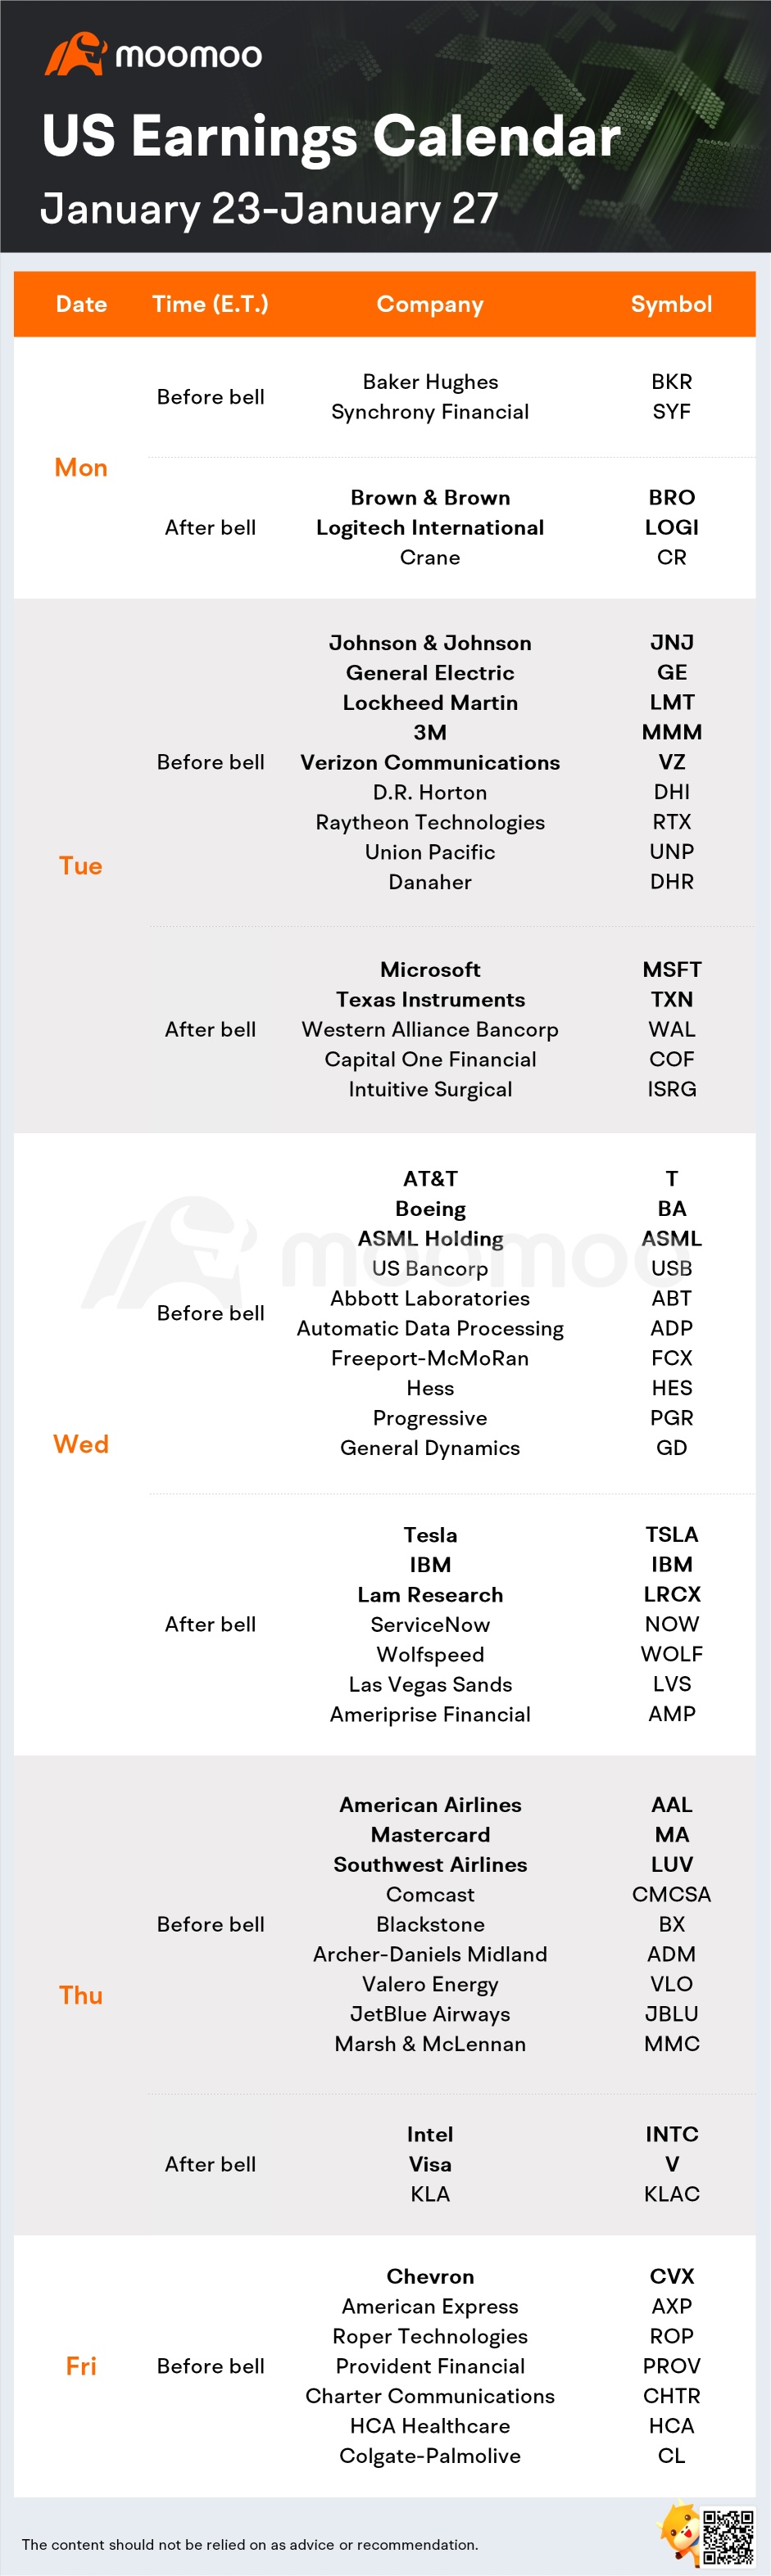 What to Expect in the Week Ahead (TSLA, MSFT, INTC Earnings; GDP, PCE Data)